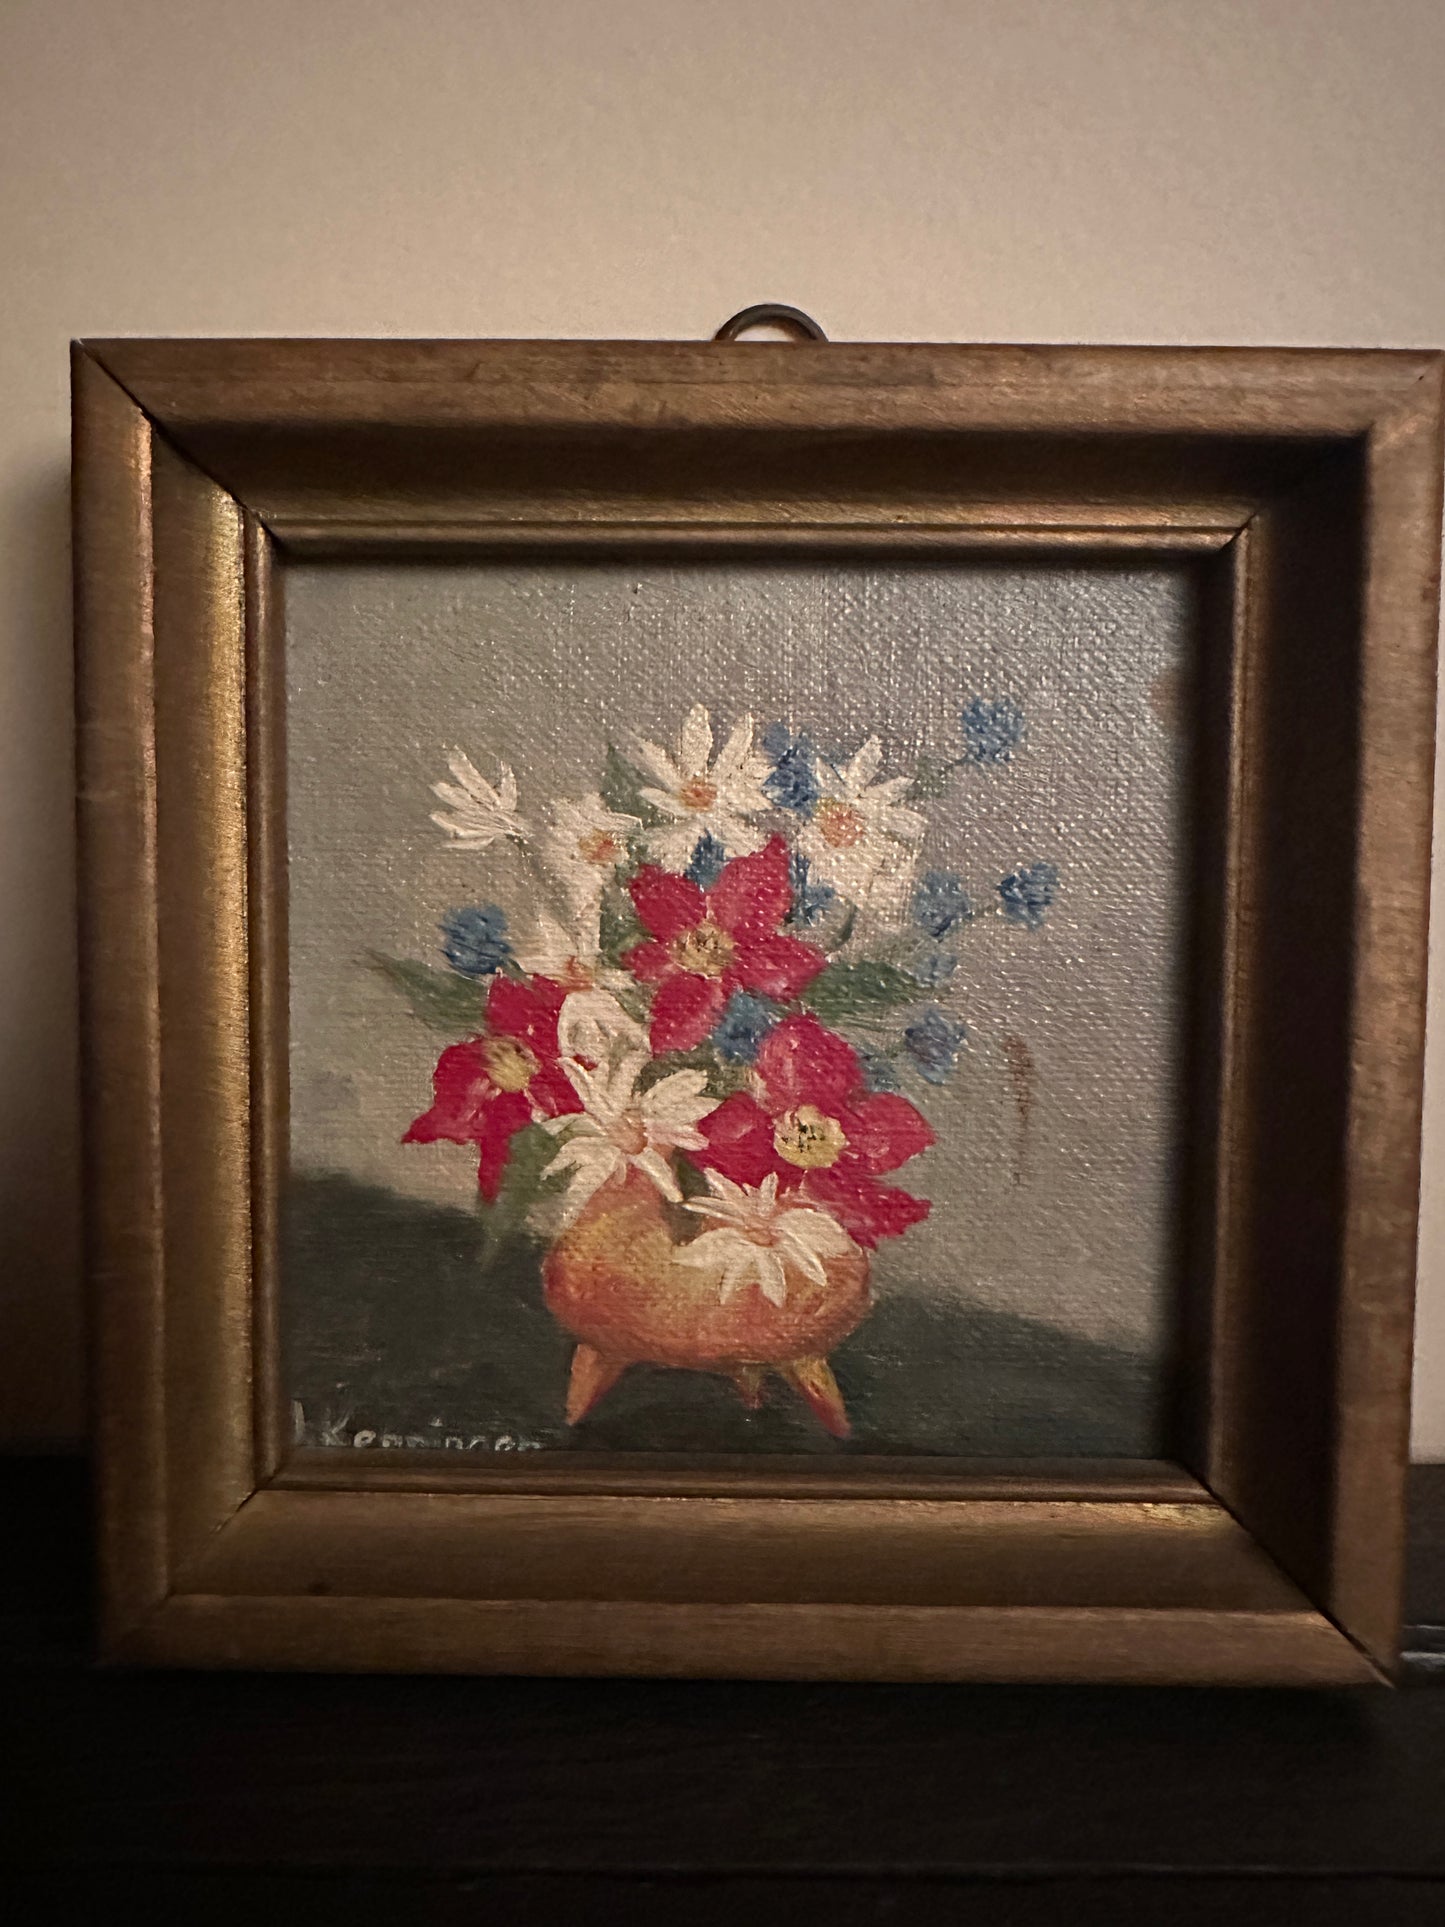 A Pair of Still Life Floral Oil Painting Signed by Joan Keppinger